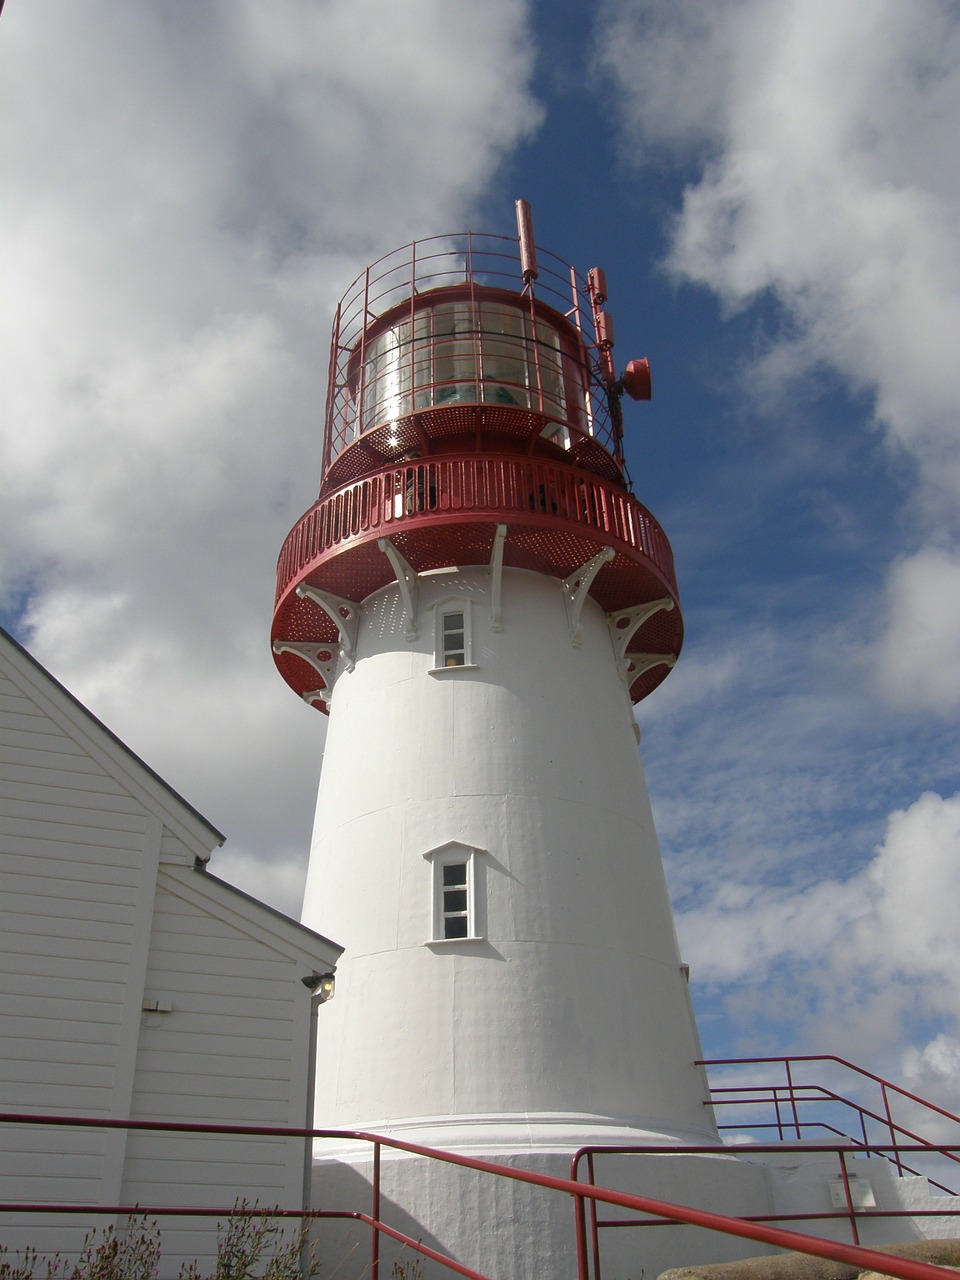 Download Free Photo Of Norway Scandinavia Lighthouse Building Free Pictures From